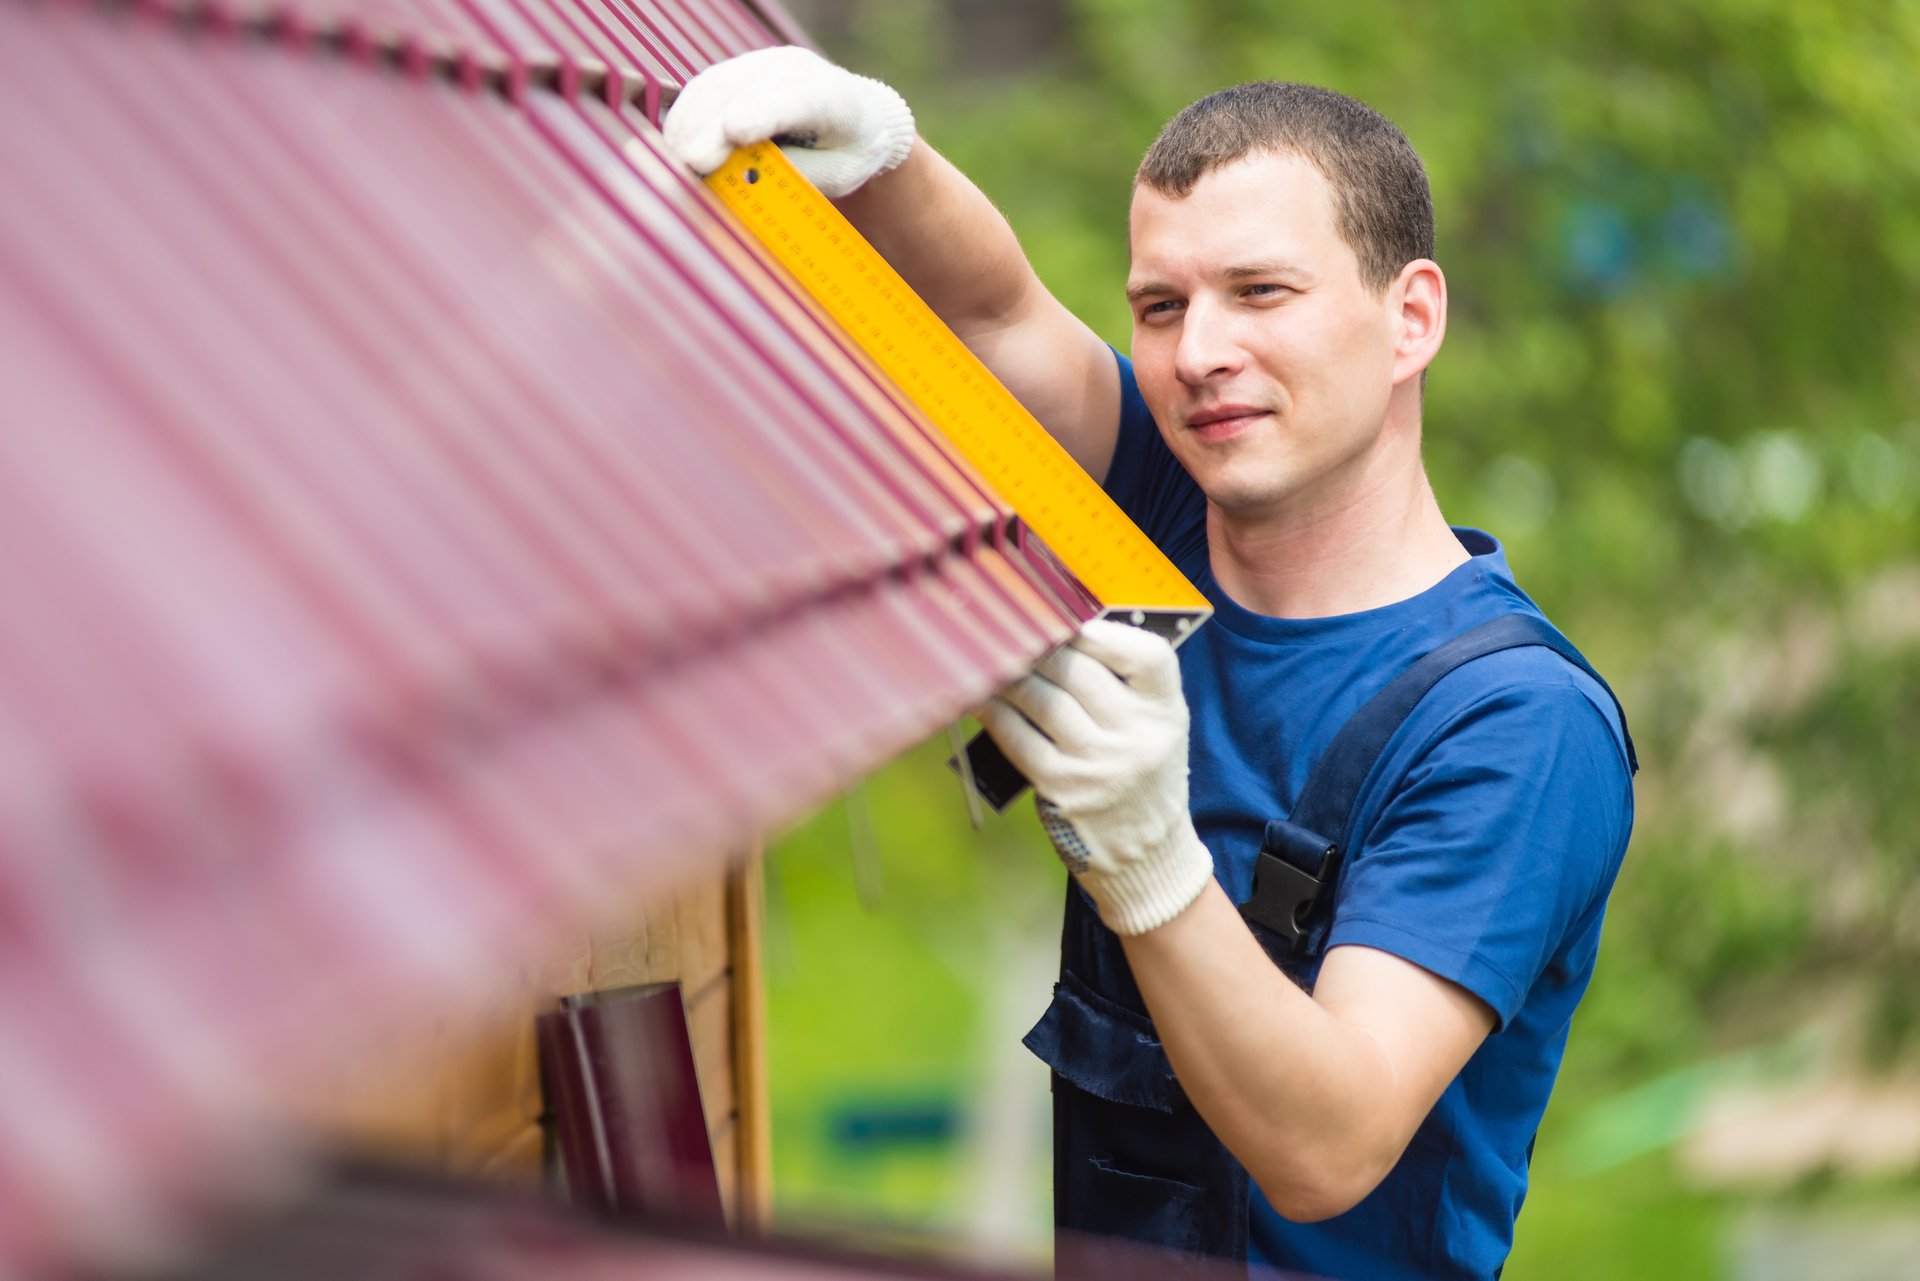 7 Tips for Getting the Best Deal on a New Roof